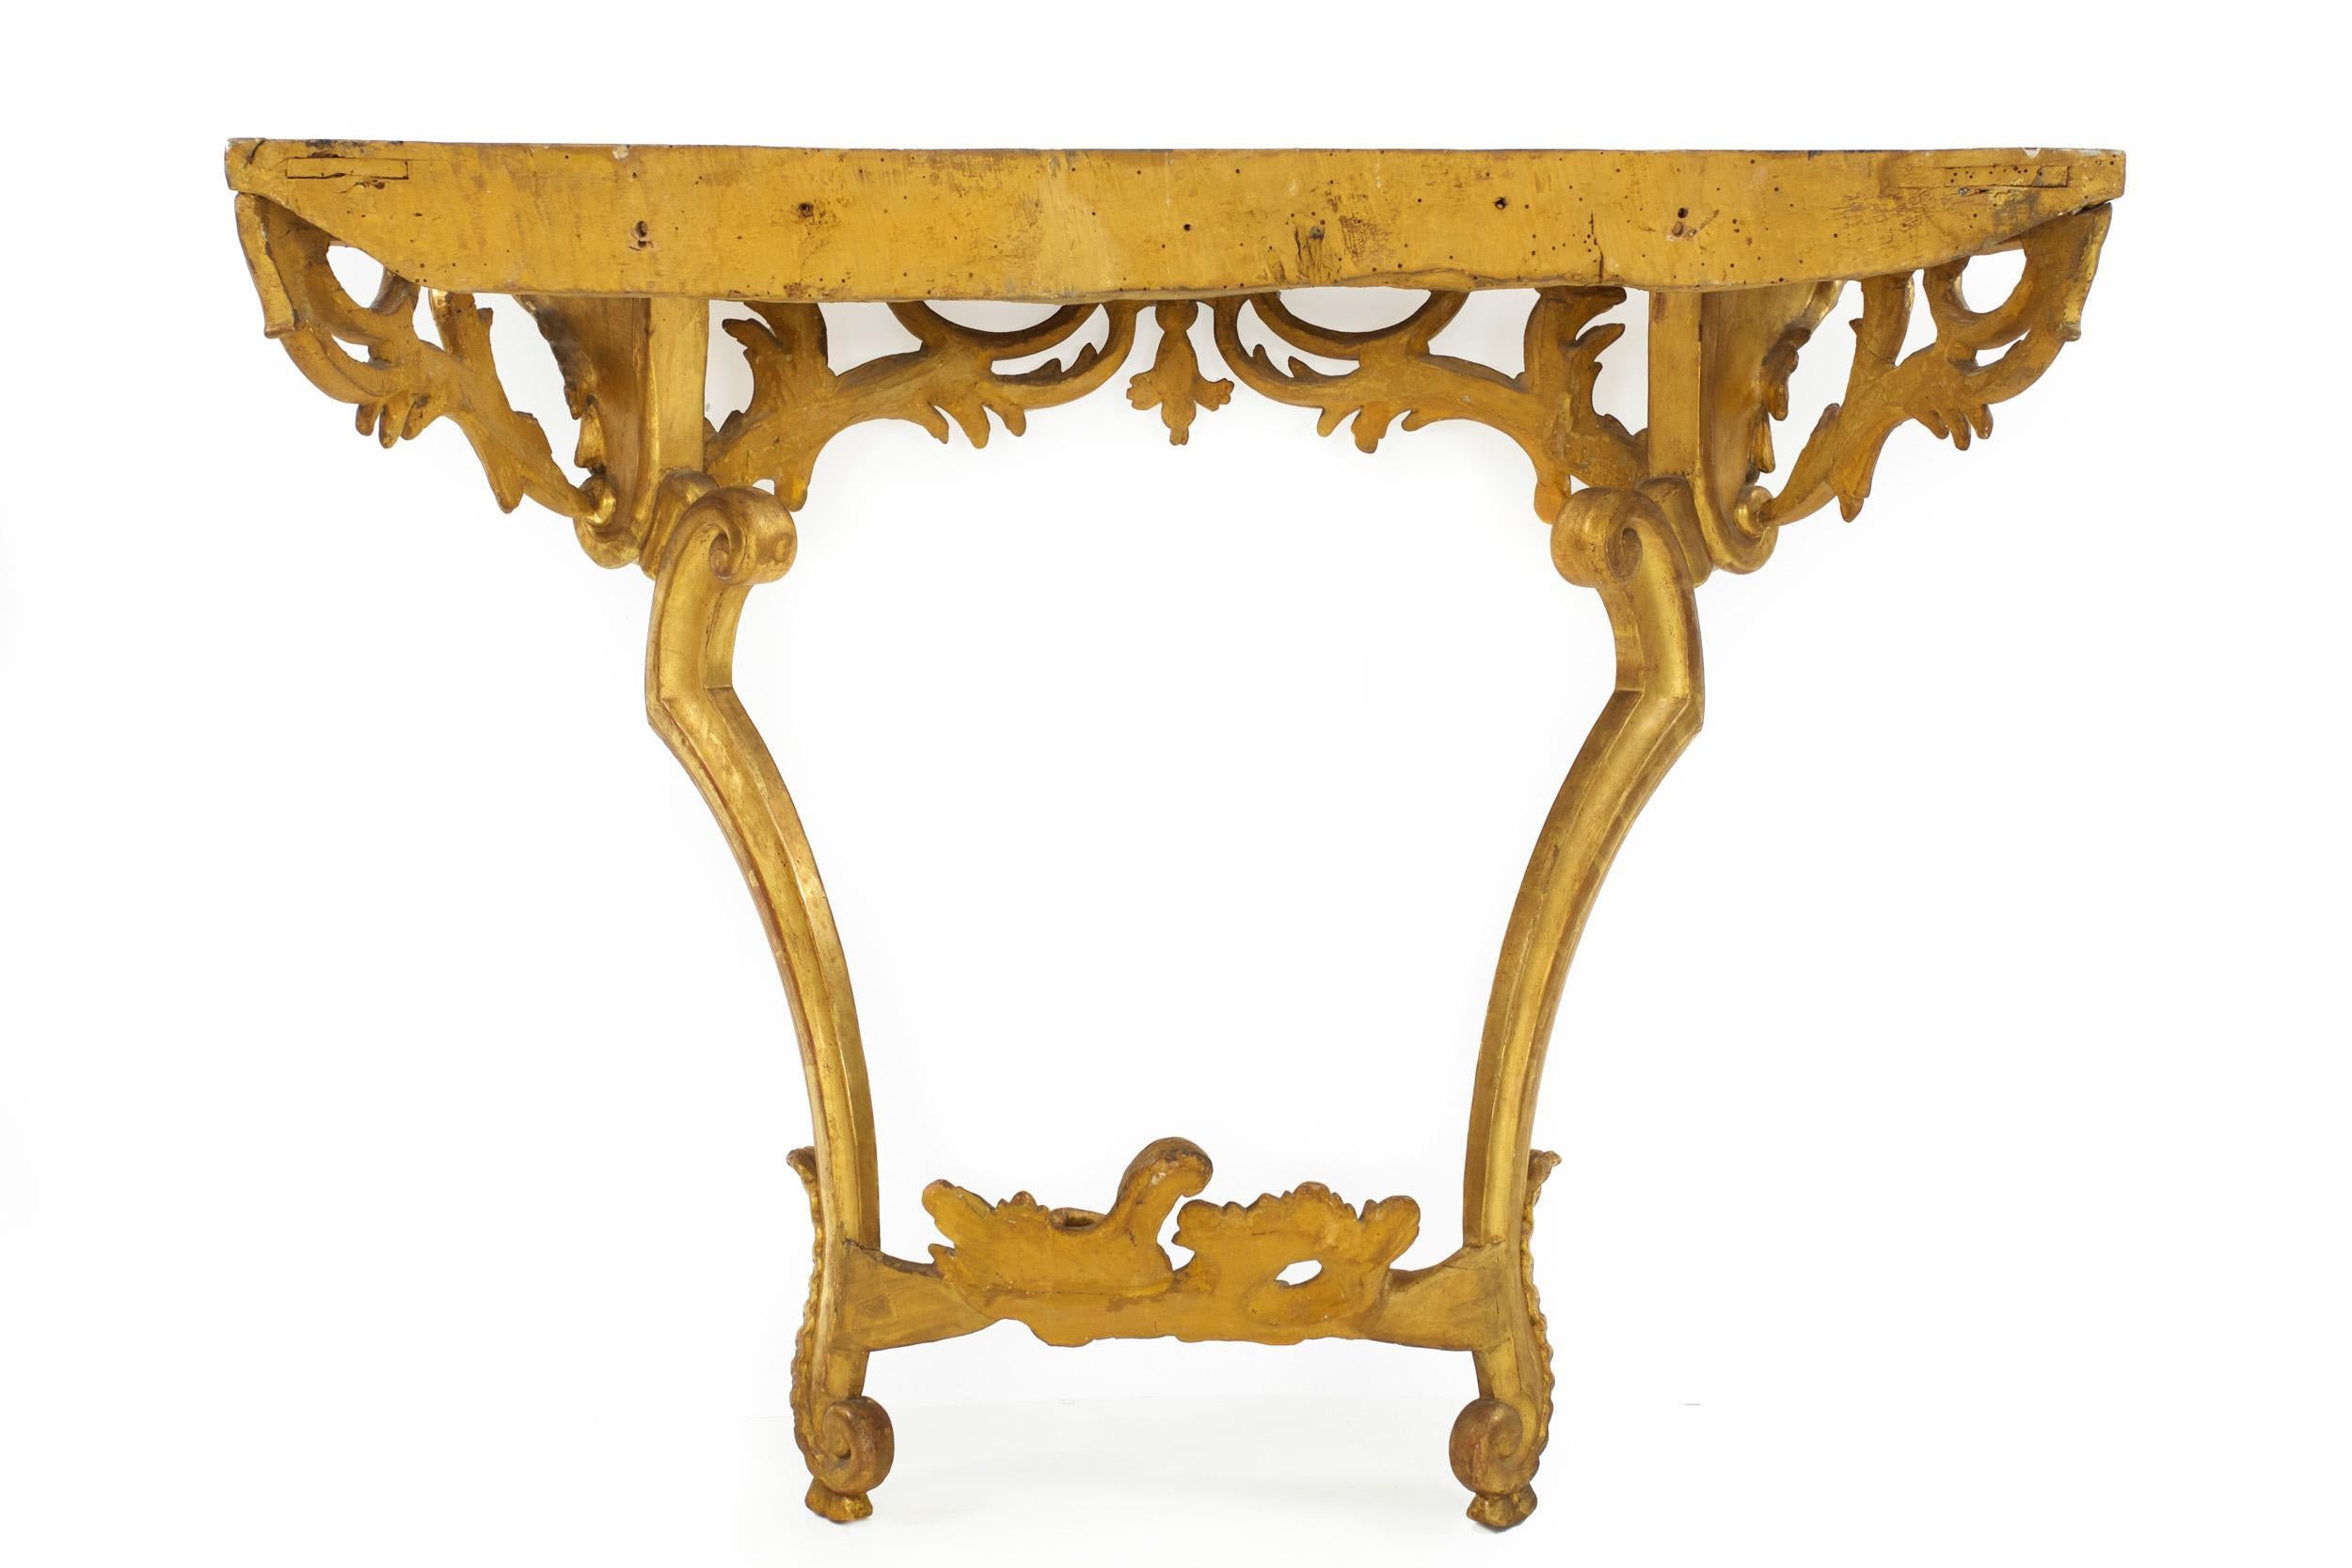 Rococo Style Carved Giltwood Antique Pier Console Table, 19th Century For Sale 5